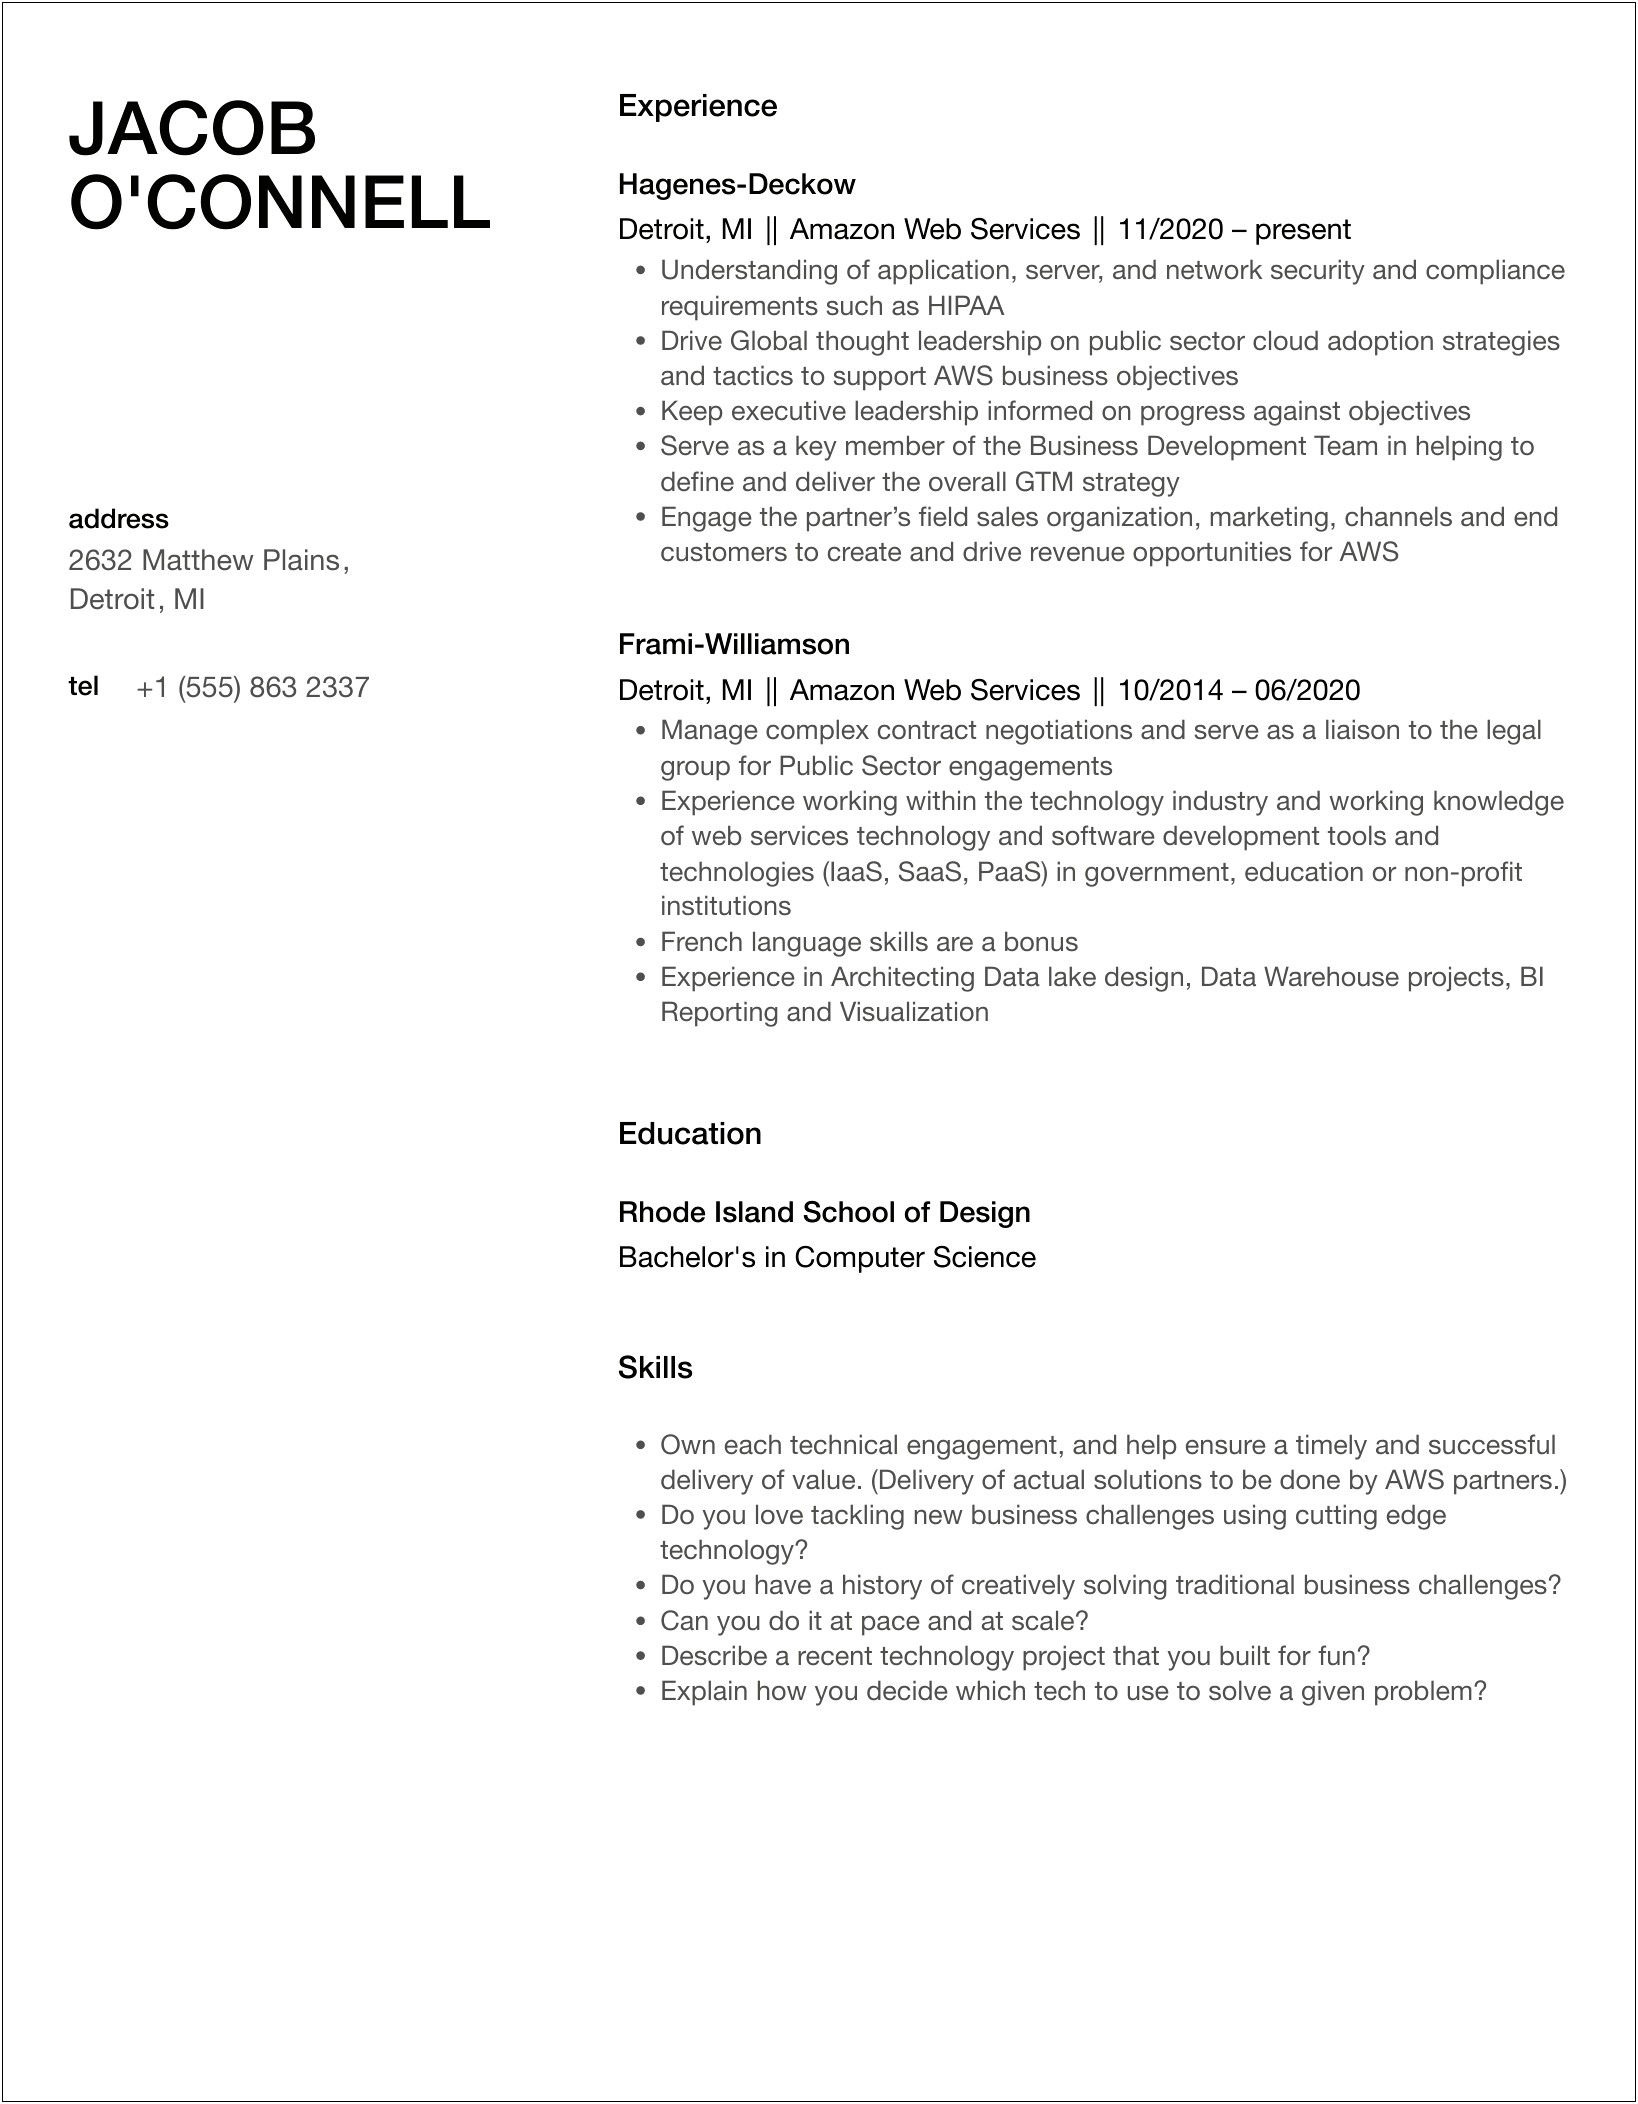 Good Resume For Amaozon Web Services And Java